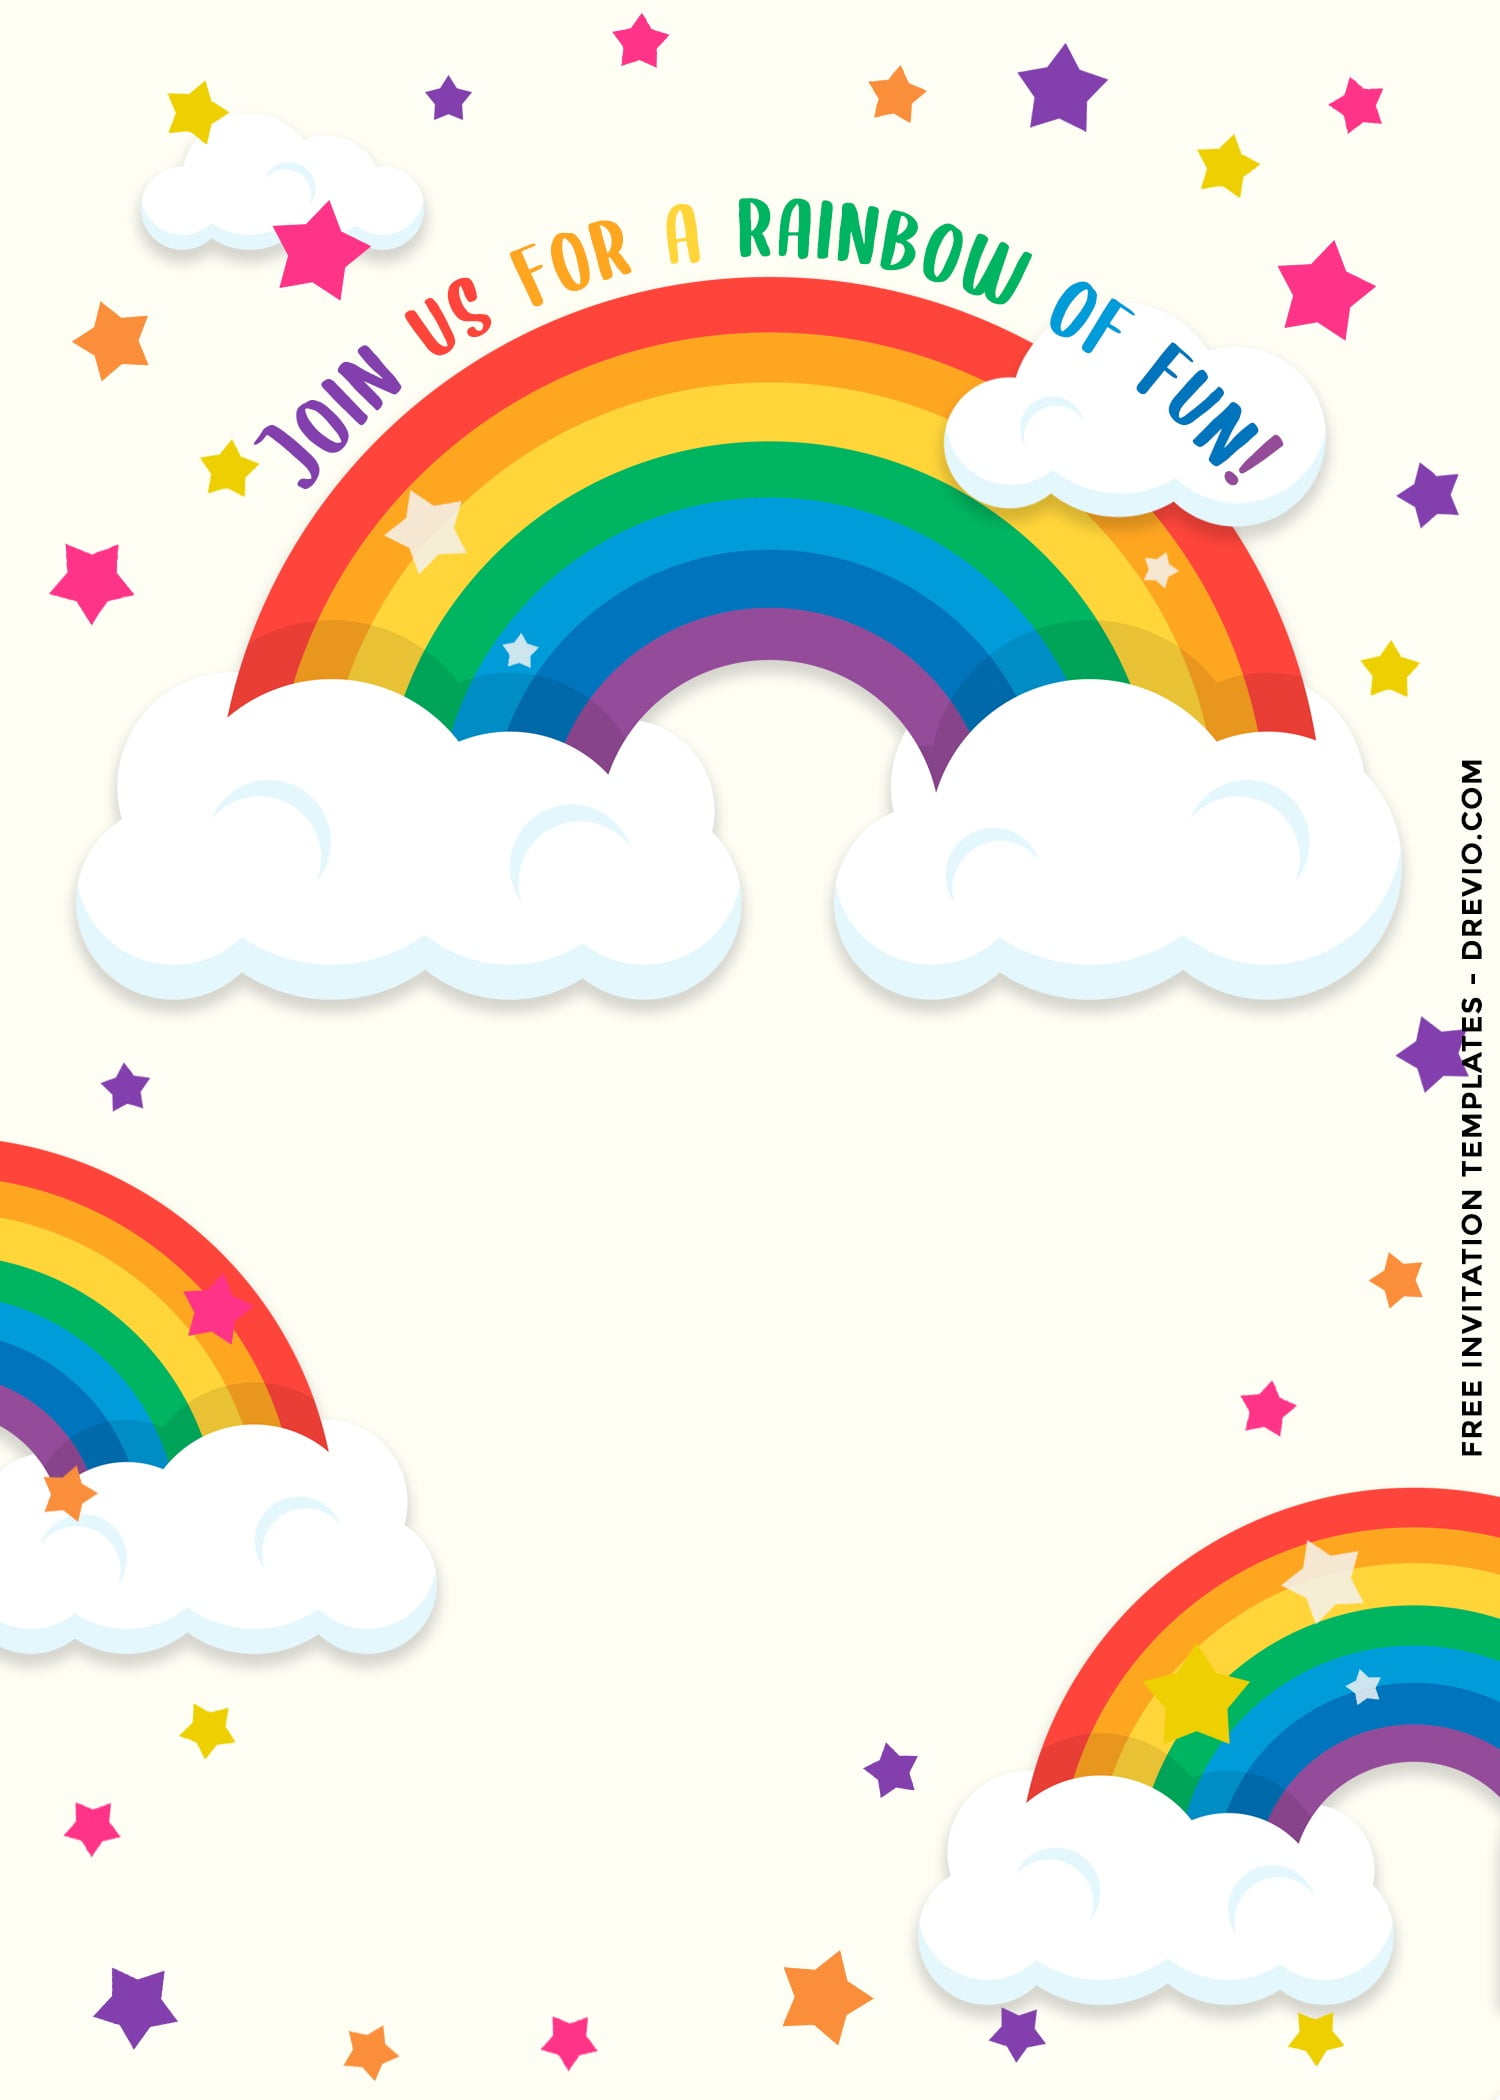 9-rainbow-birthday-party-invitation-templates-for-girls-download-hundreds-free-printable